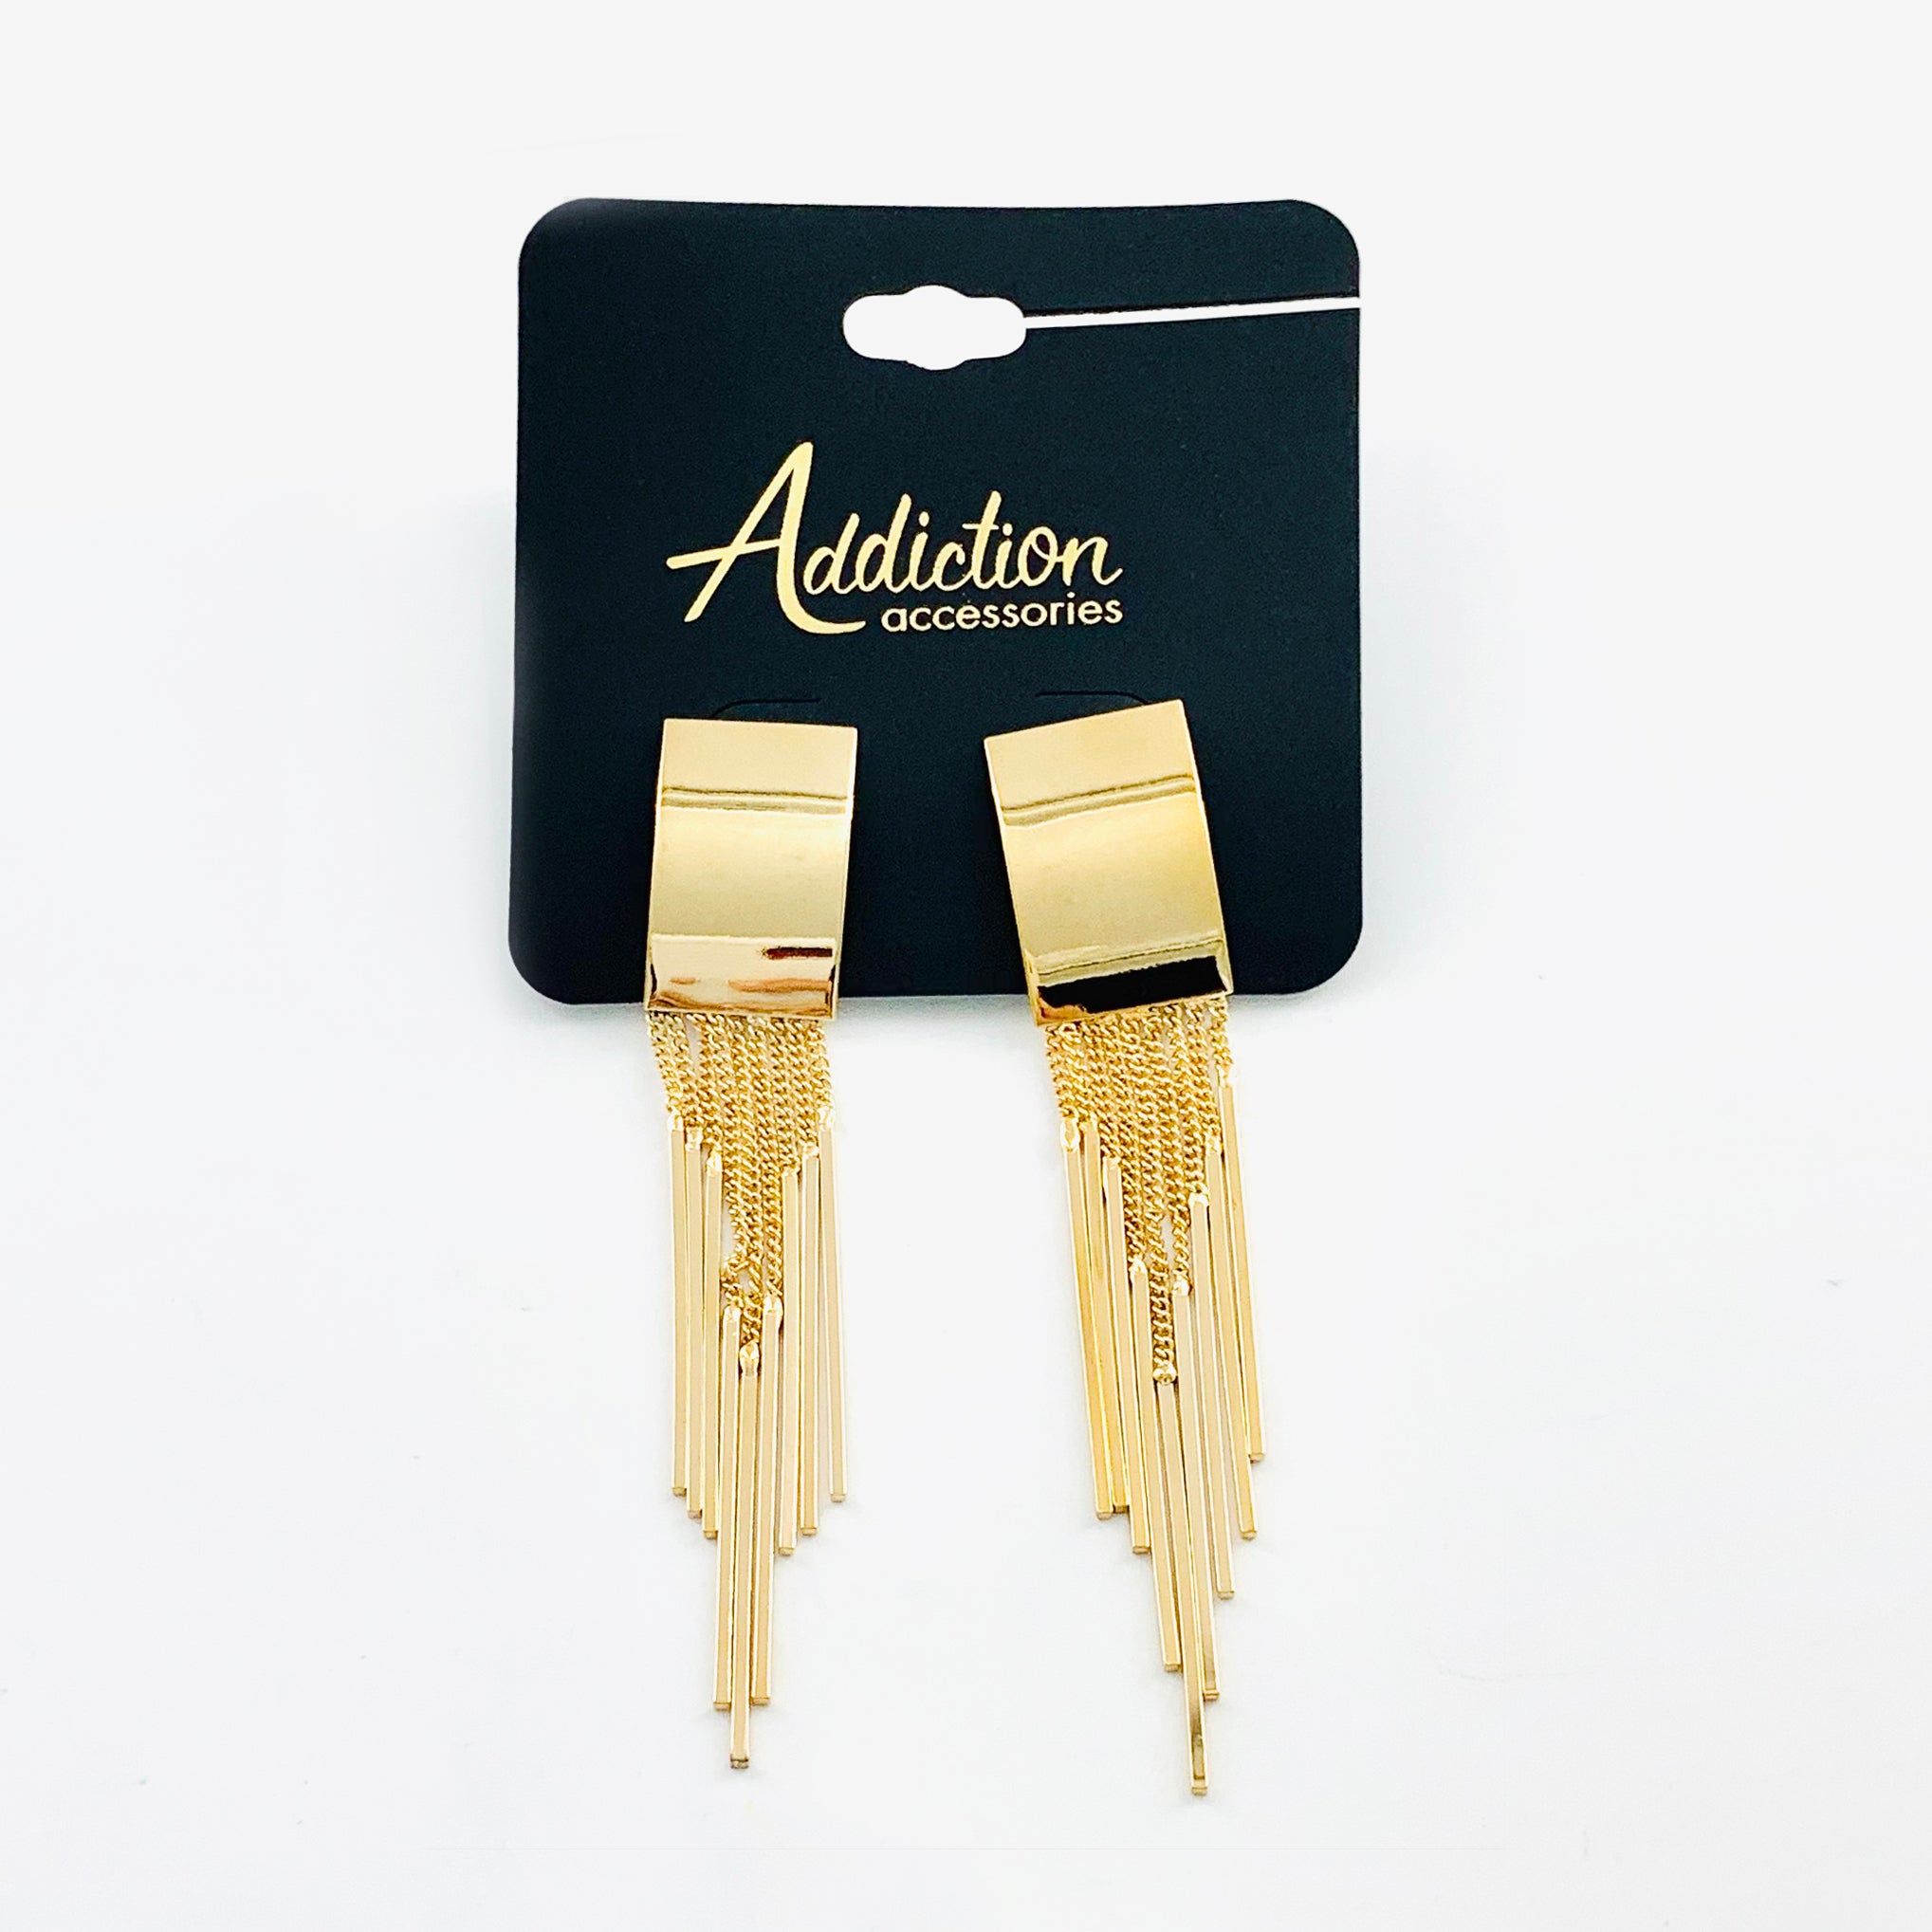 Gold earrings with dangling chains and bars